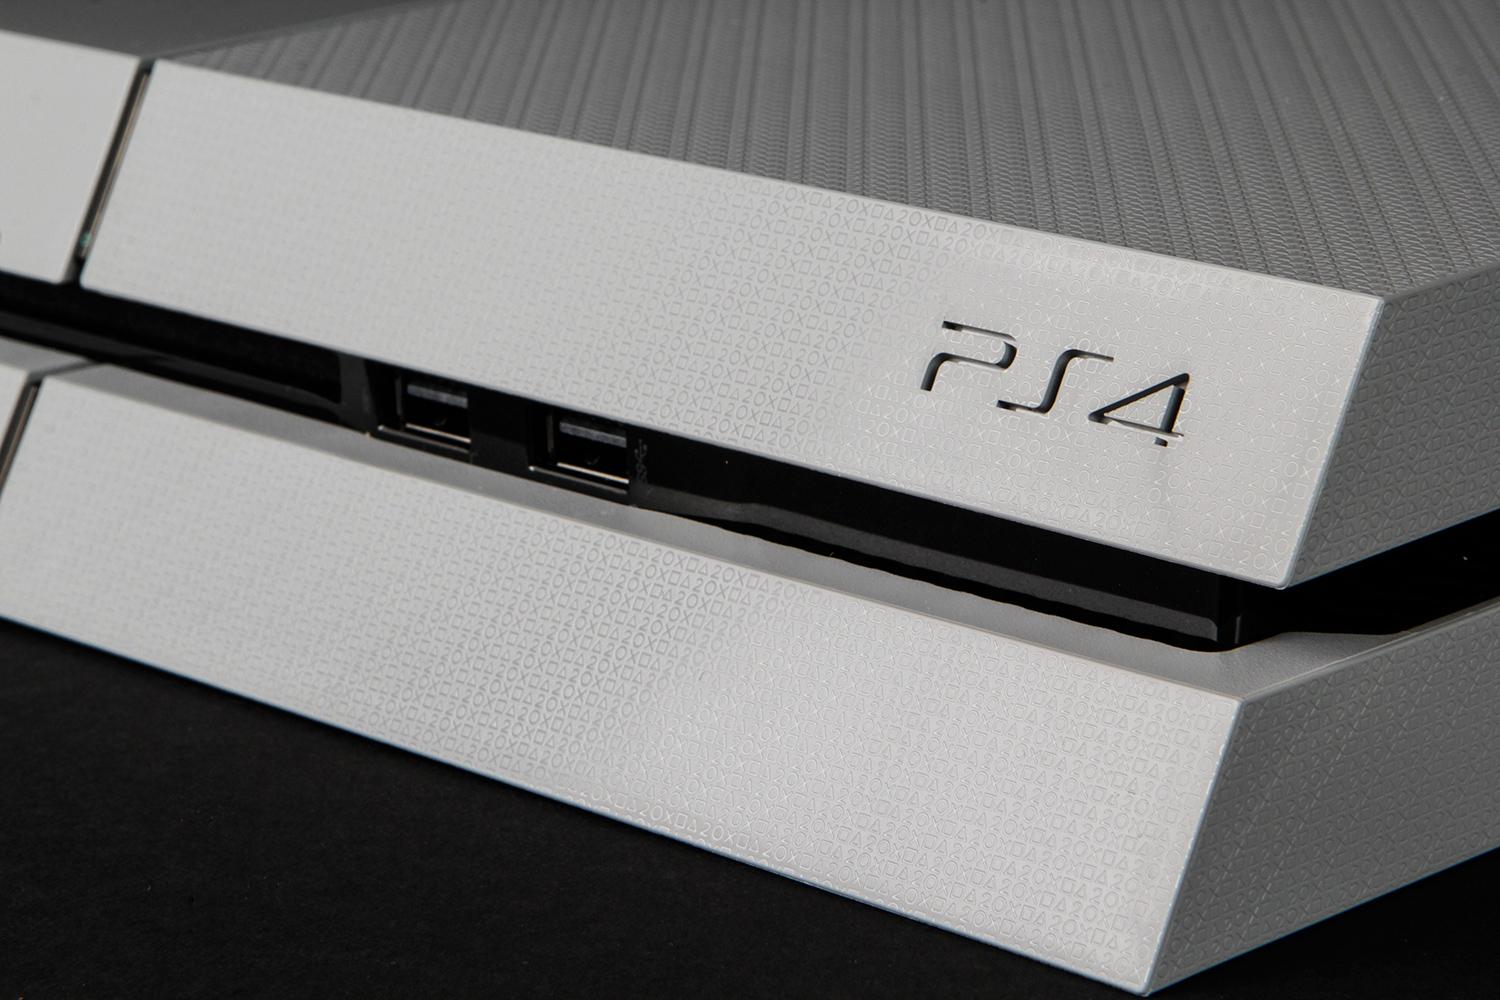 Leaked Sony Documents Offer PlayStation 4 Details | Digital Trends